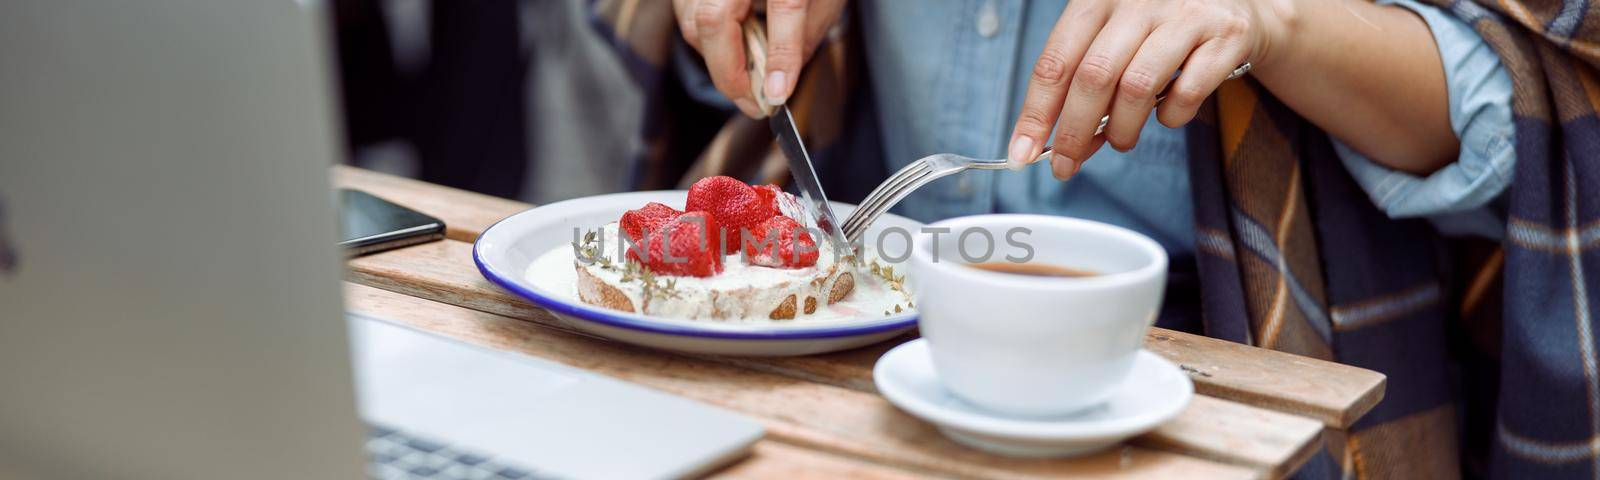 Mature woman eats toast with cut strawberries and cream at table on outdoors cafe terrace by Yaroslav_astakhov